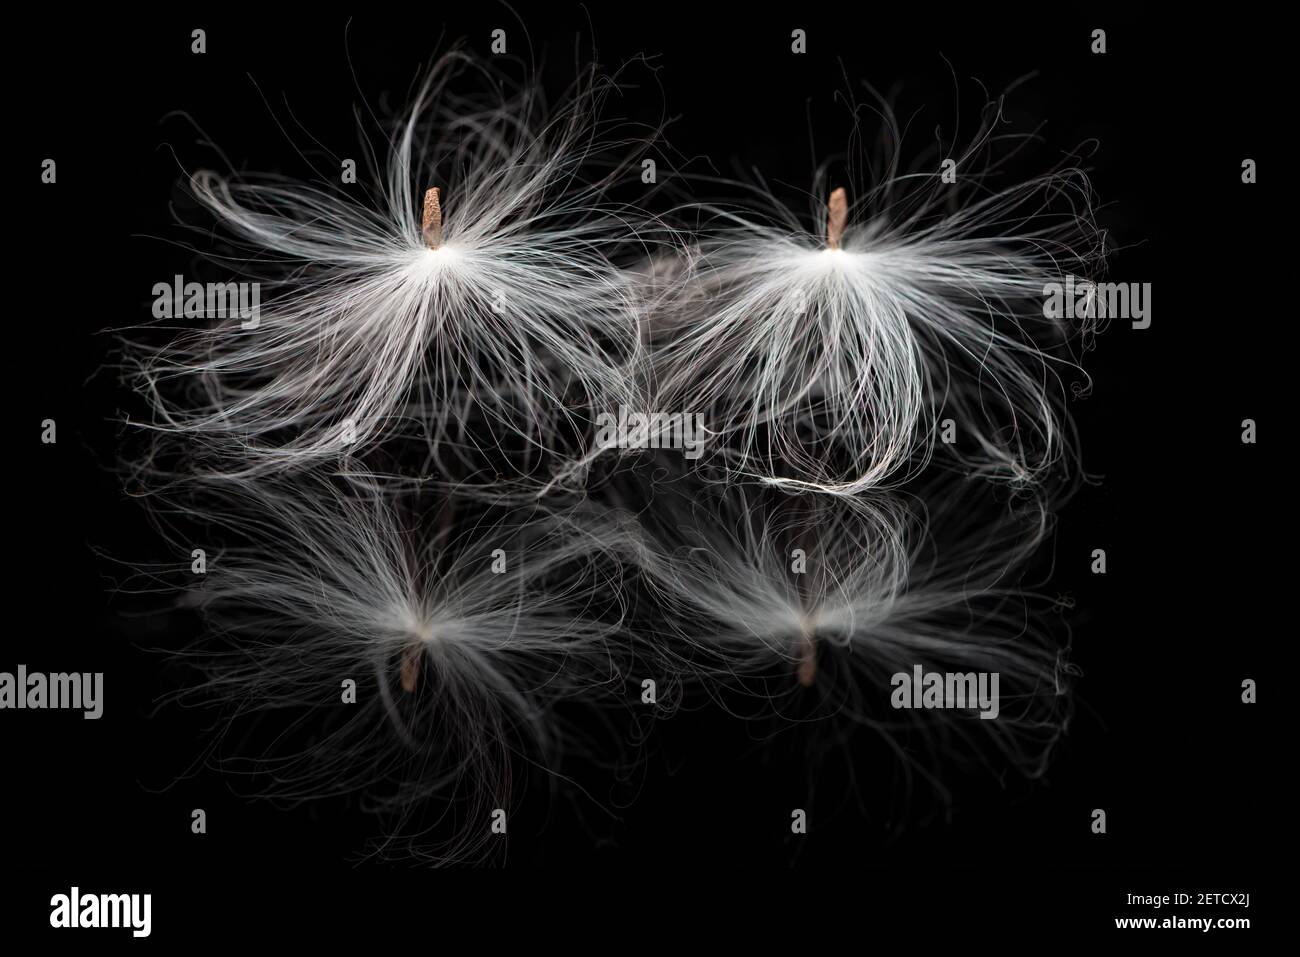 Seeds of a gomphocarpus physocarpus (balloon plant) milkweed with silk attached, on a black background Stock Photo